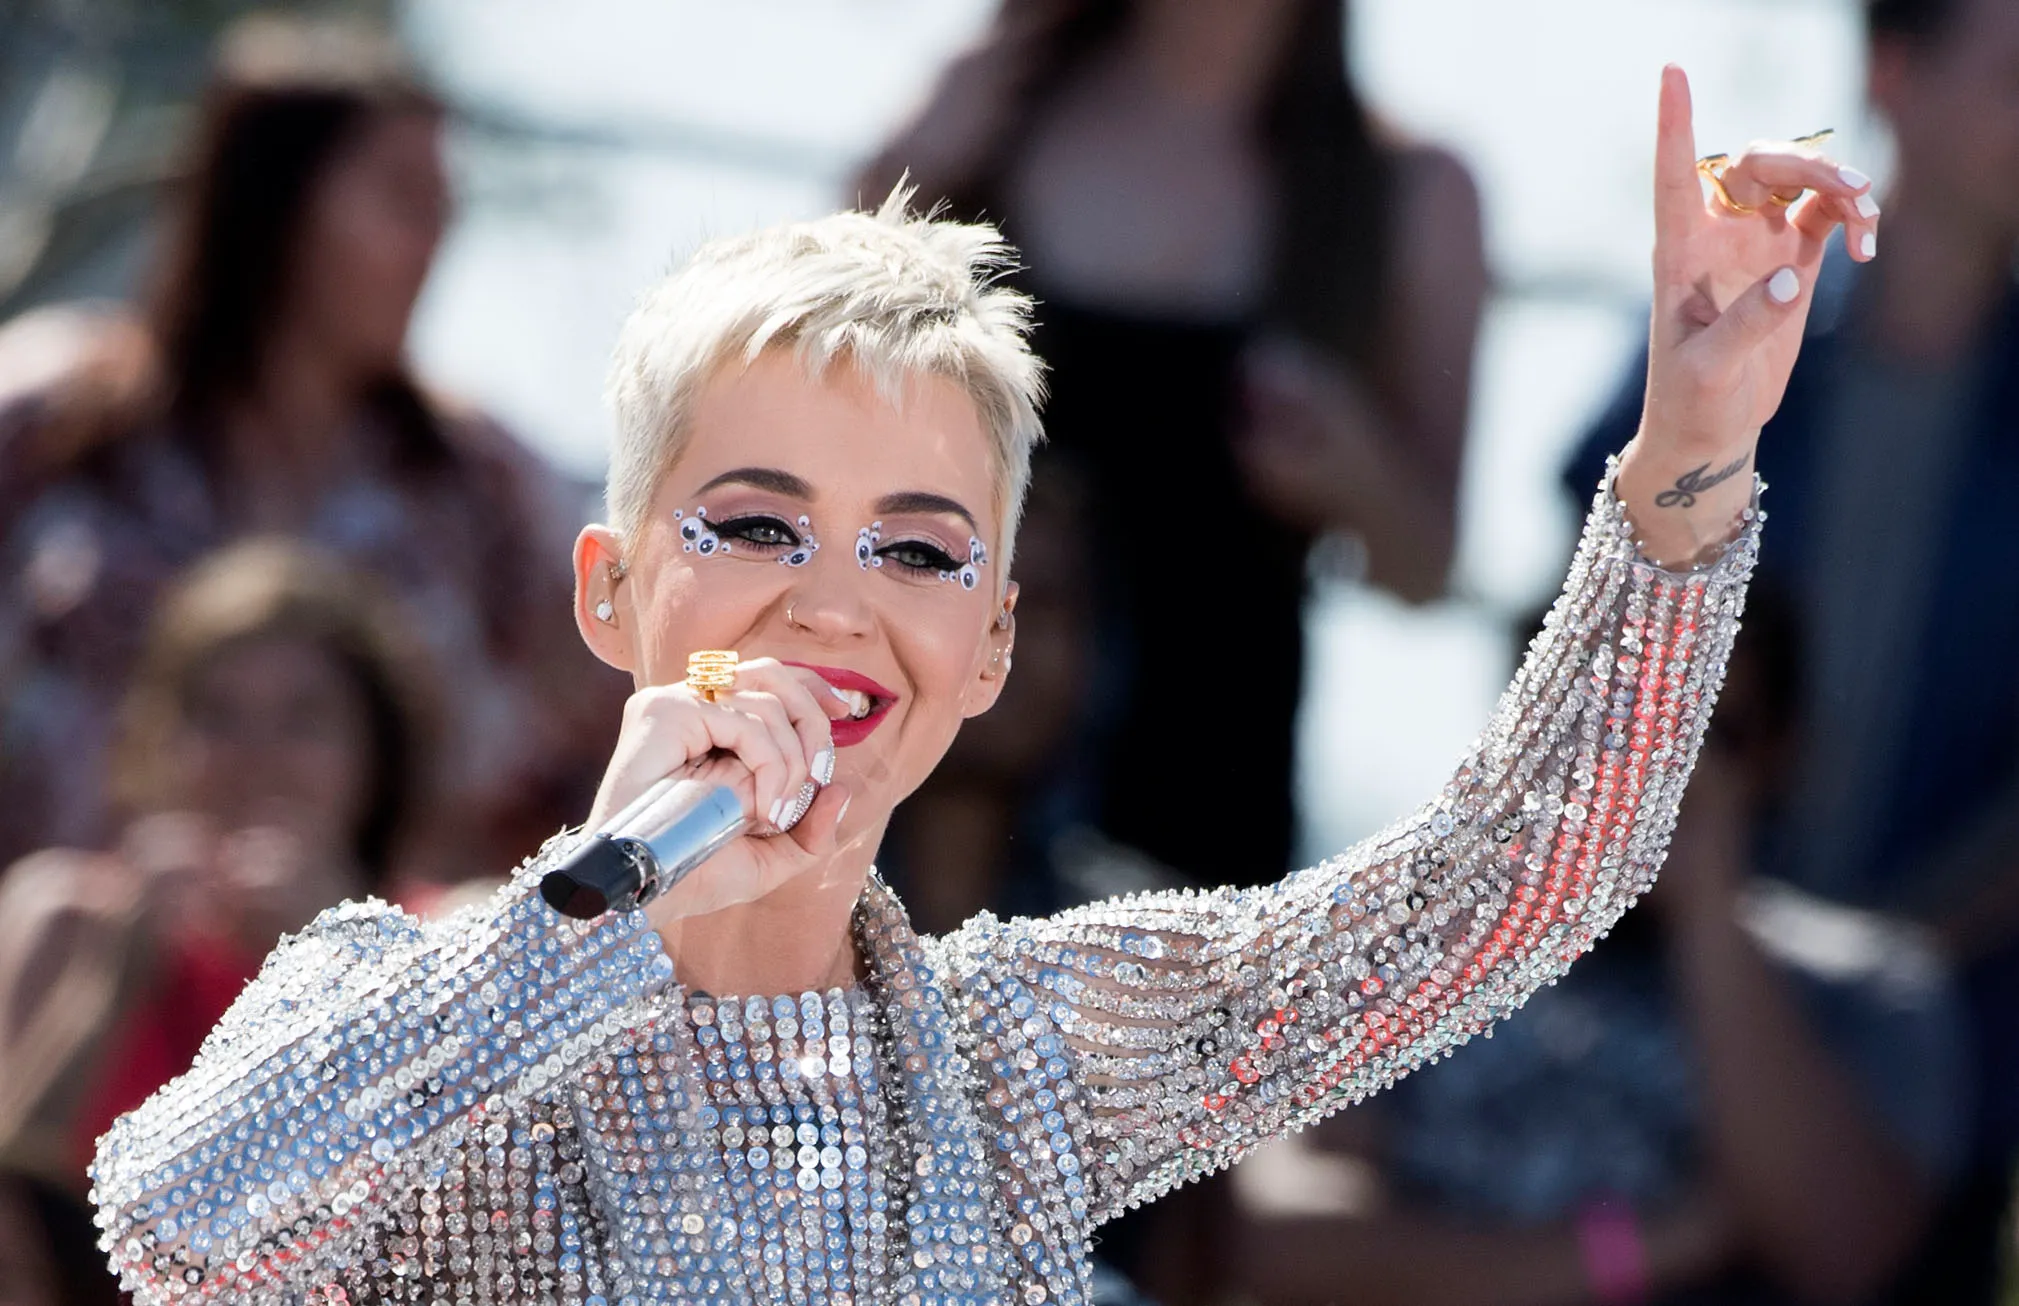 Katy Perry's 3 Most Valuable Career Lessons